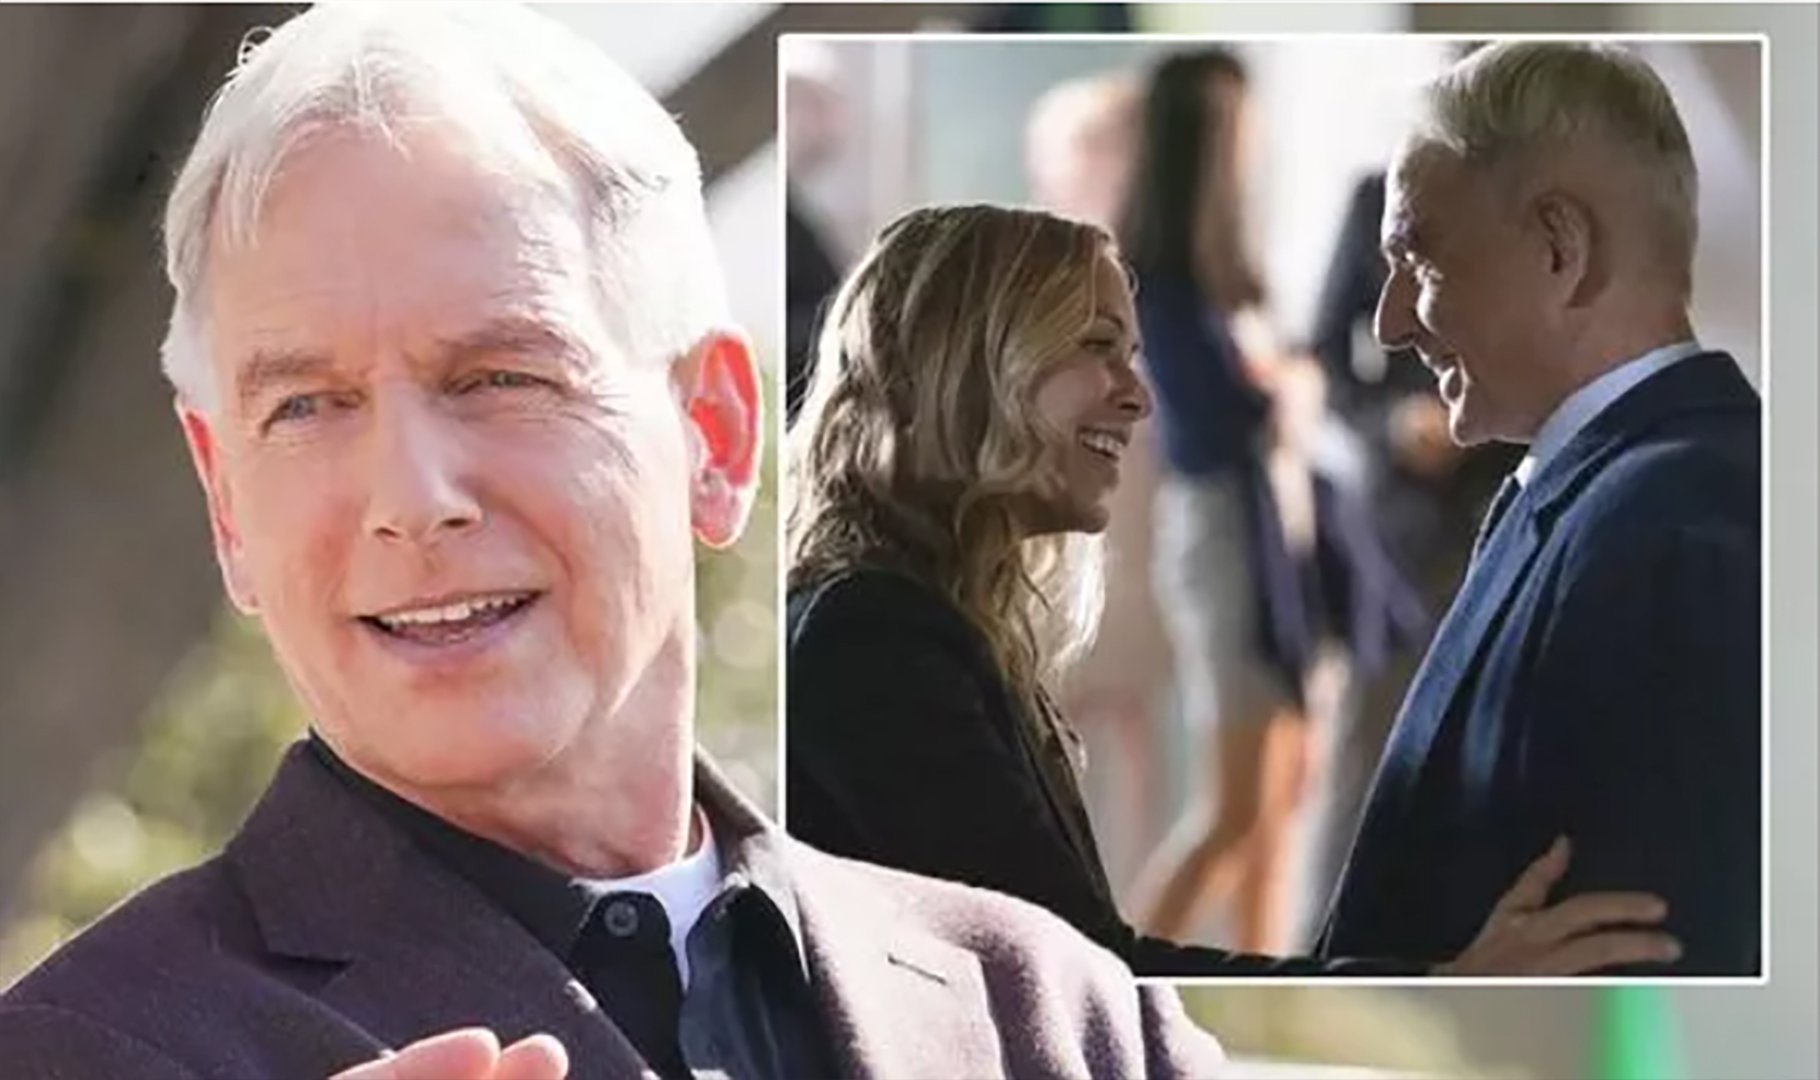 Ncis Season 18 Jack Sloane And Gibbs Romance ‘sealed In First Look Photo Curious World 